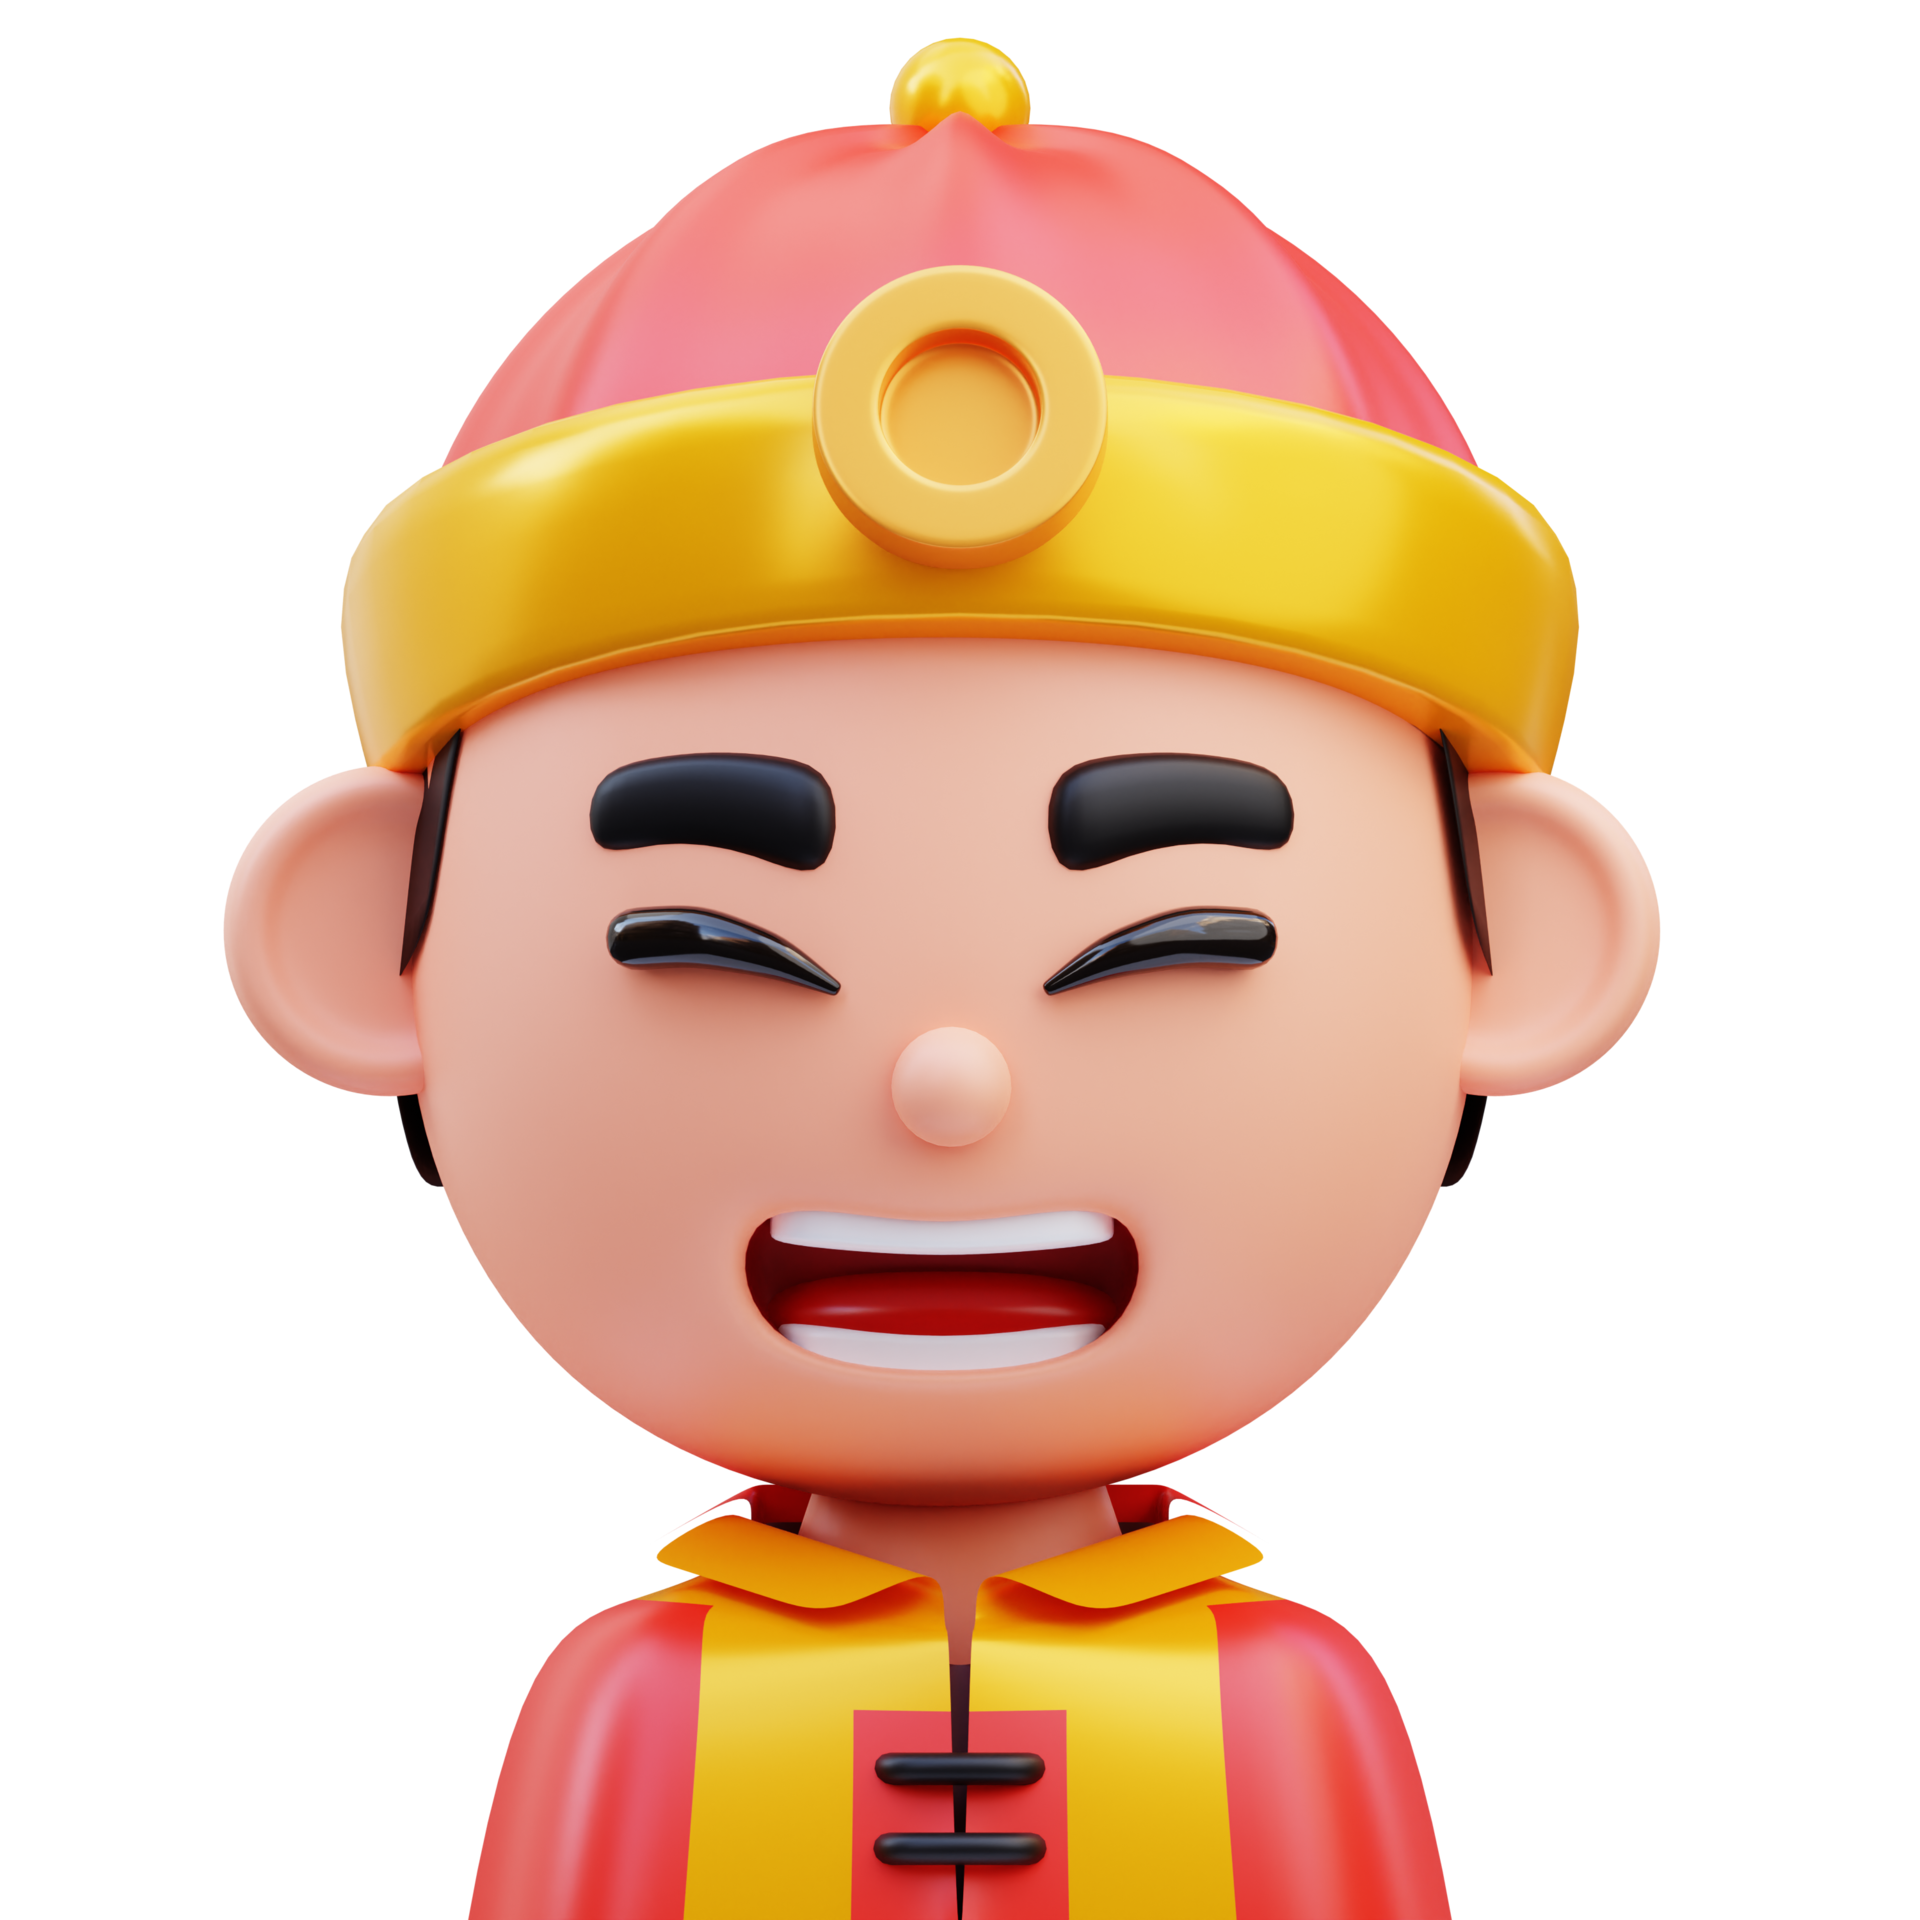 3d Render Illustration Of Cute Male Avatar Icon Wearing Typical Chinese Hat Chinese New Year 